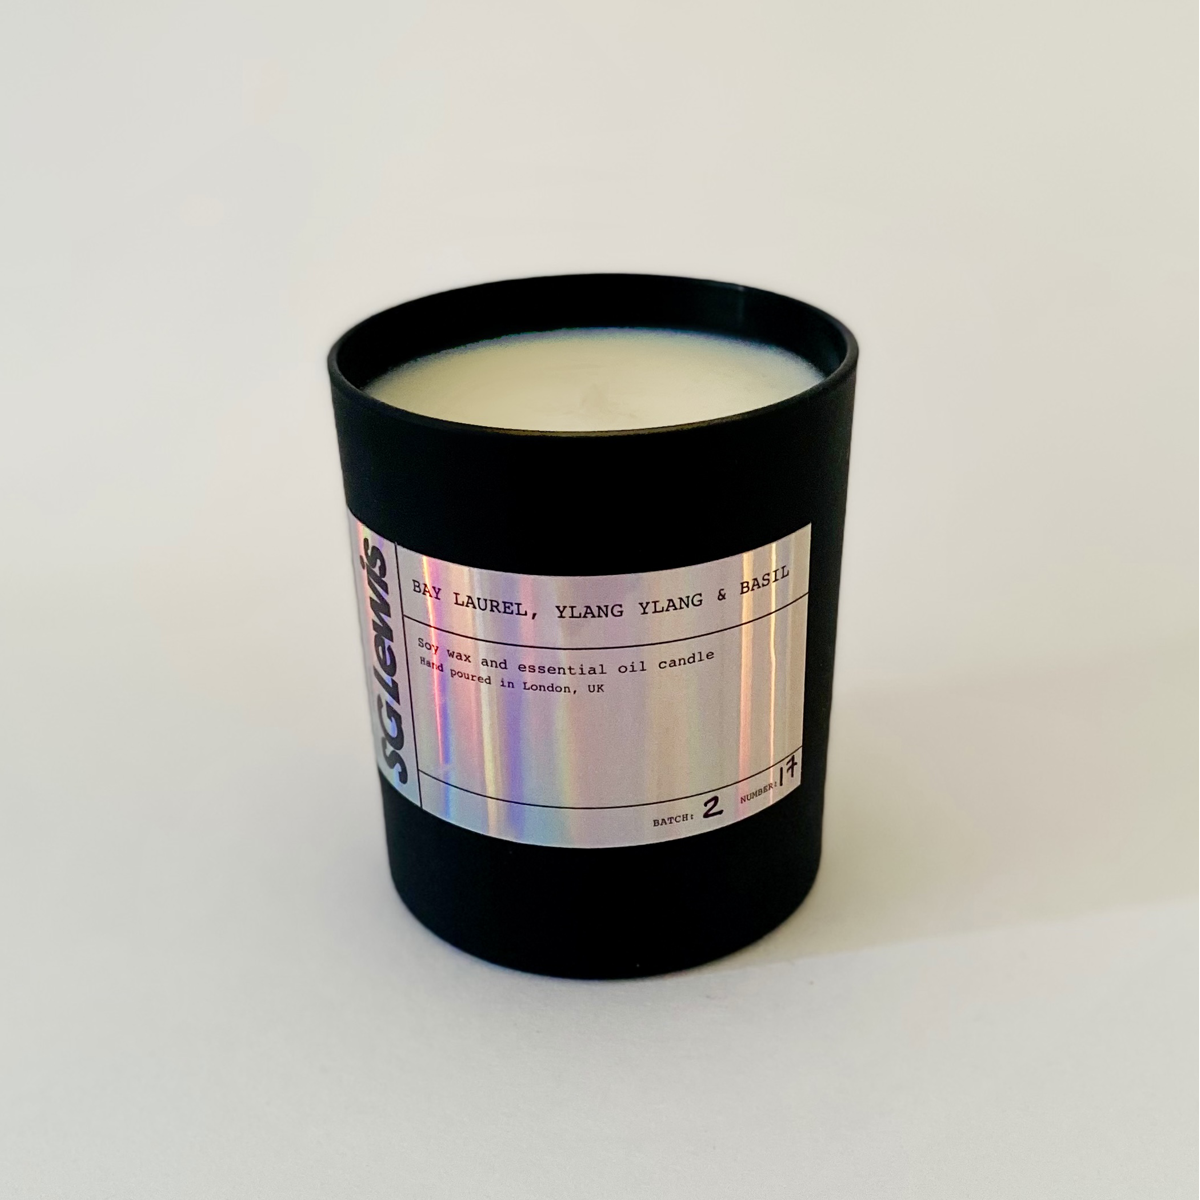 SG Lewis - ‘Fall’ Scented Candle